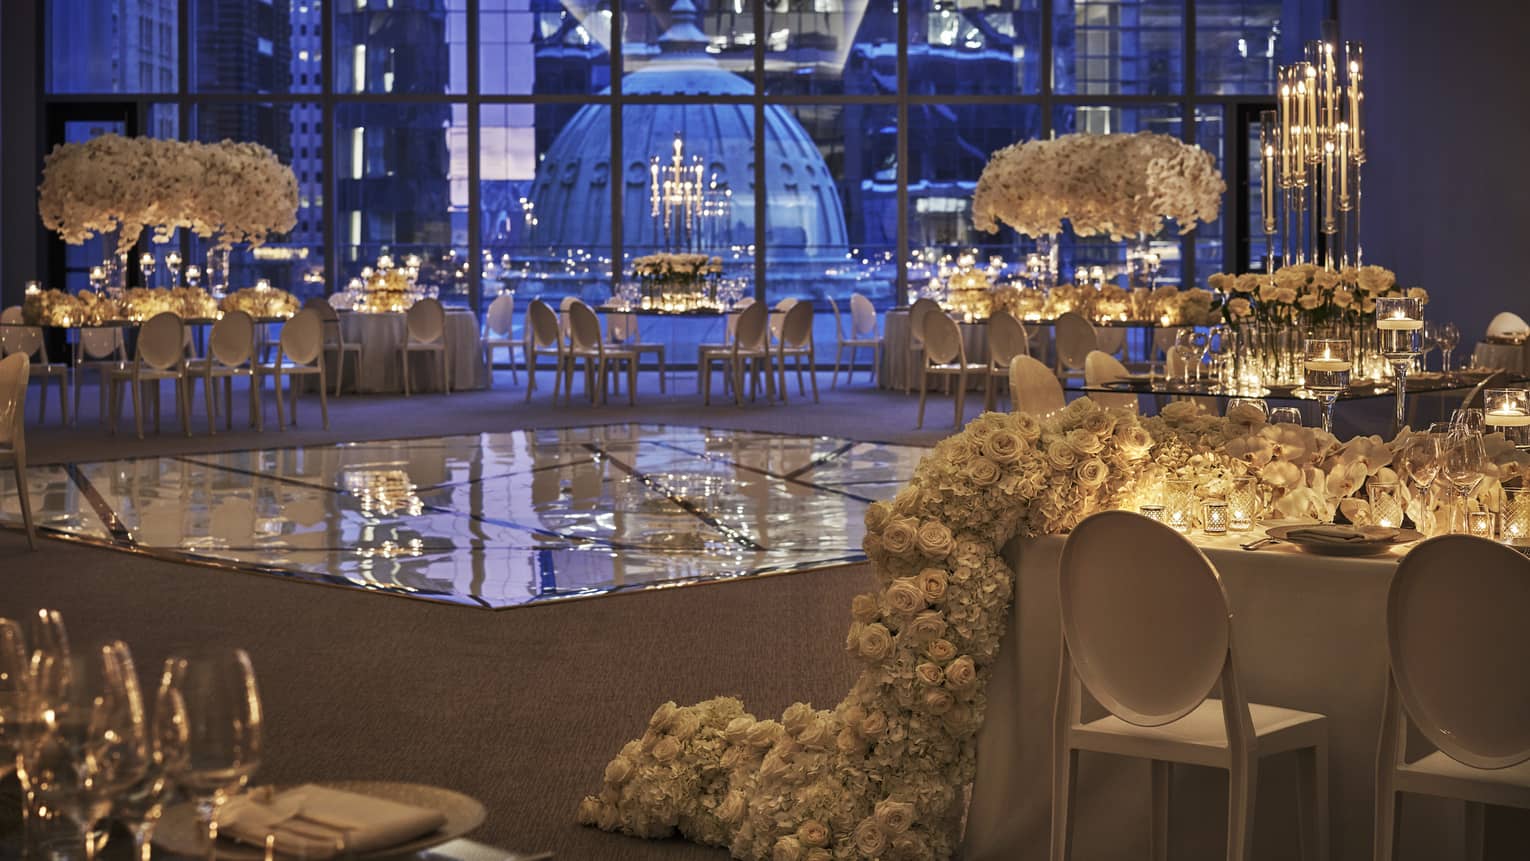 The dance floor in the ballroom is surrounded by white tables decorated with extravagant white flowers and set with white and clear dishes and glasses and overlooks downtown philadelphia through floor to ceiling windows